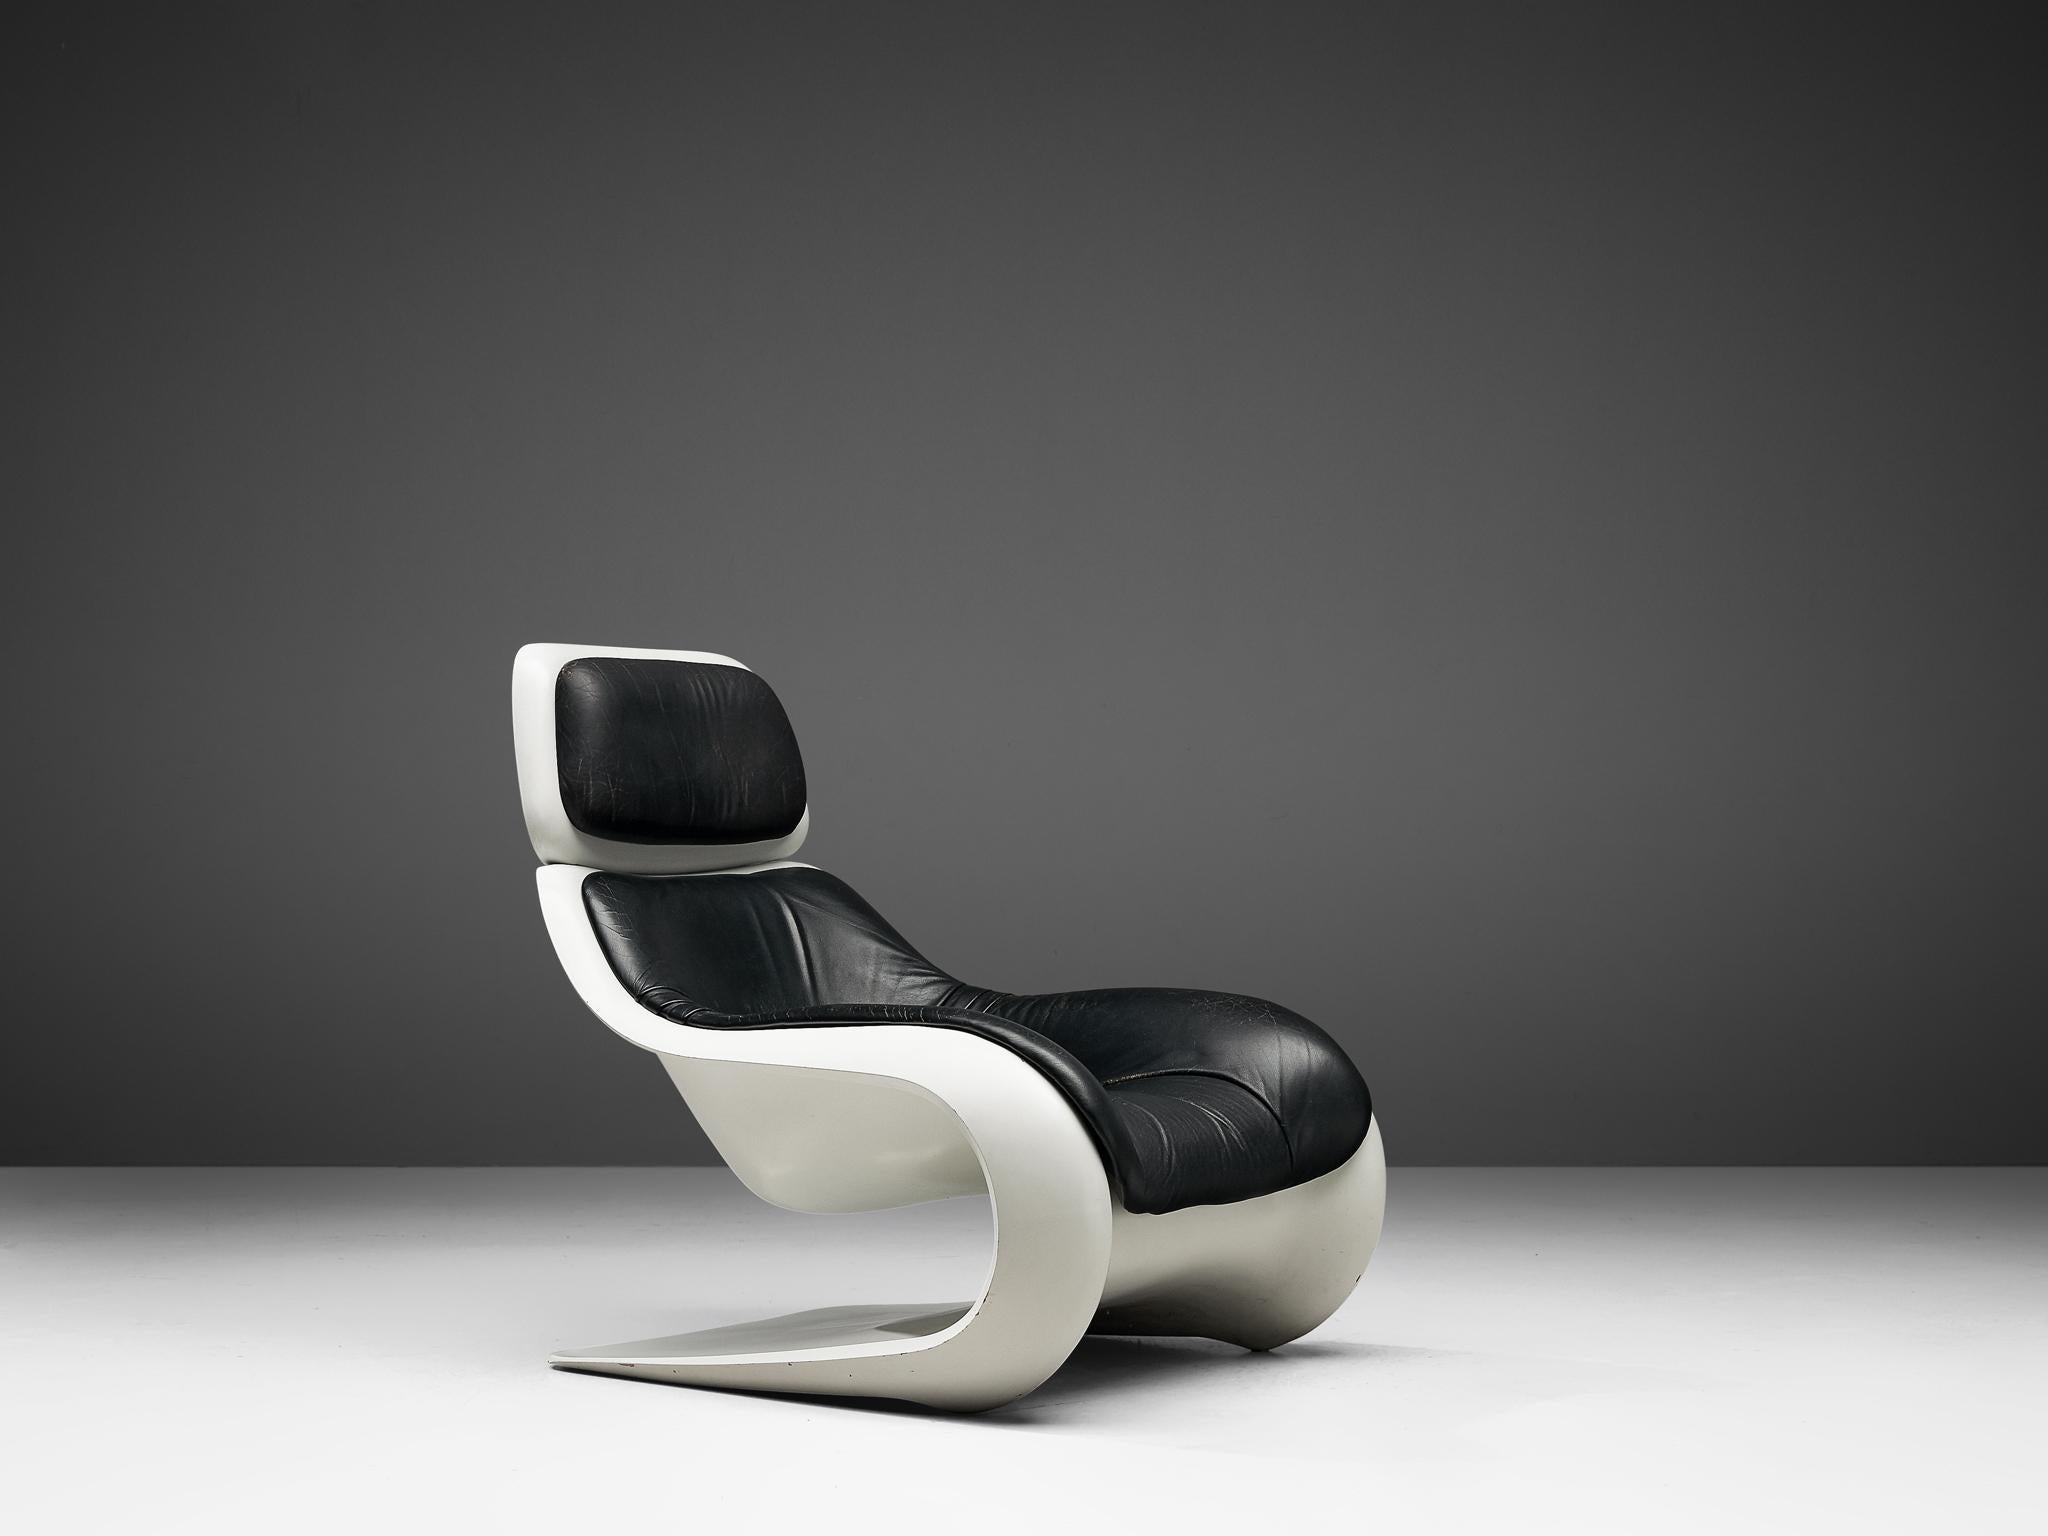 Klaus Uredat for Horn Collection, lounge chair model 'Targa', moulded polyurethane and leather,  Germany, circa 1971.
 
Sculptural easy chair by German designer Klaus Uredat. The organic shaped frame is made of molded polyurethane and shows elegant